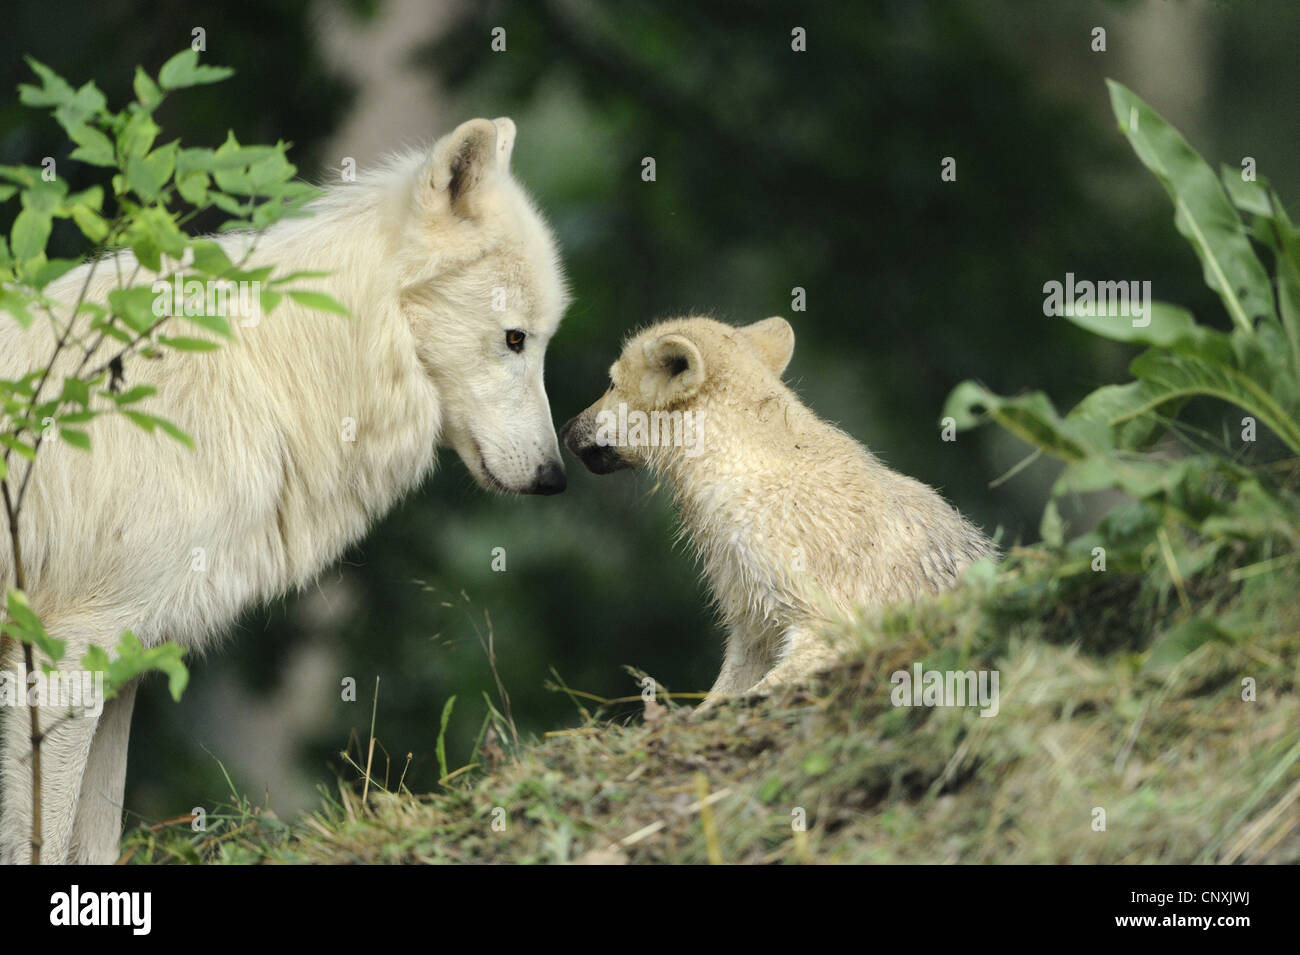 arctic wolf, tundra wolf (Canis lupus albus, Canis lupus arctos), wolf cub and she-wolf Stock Photo